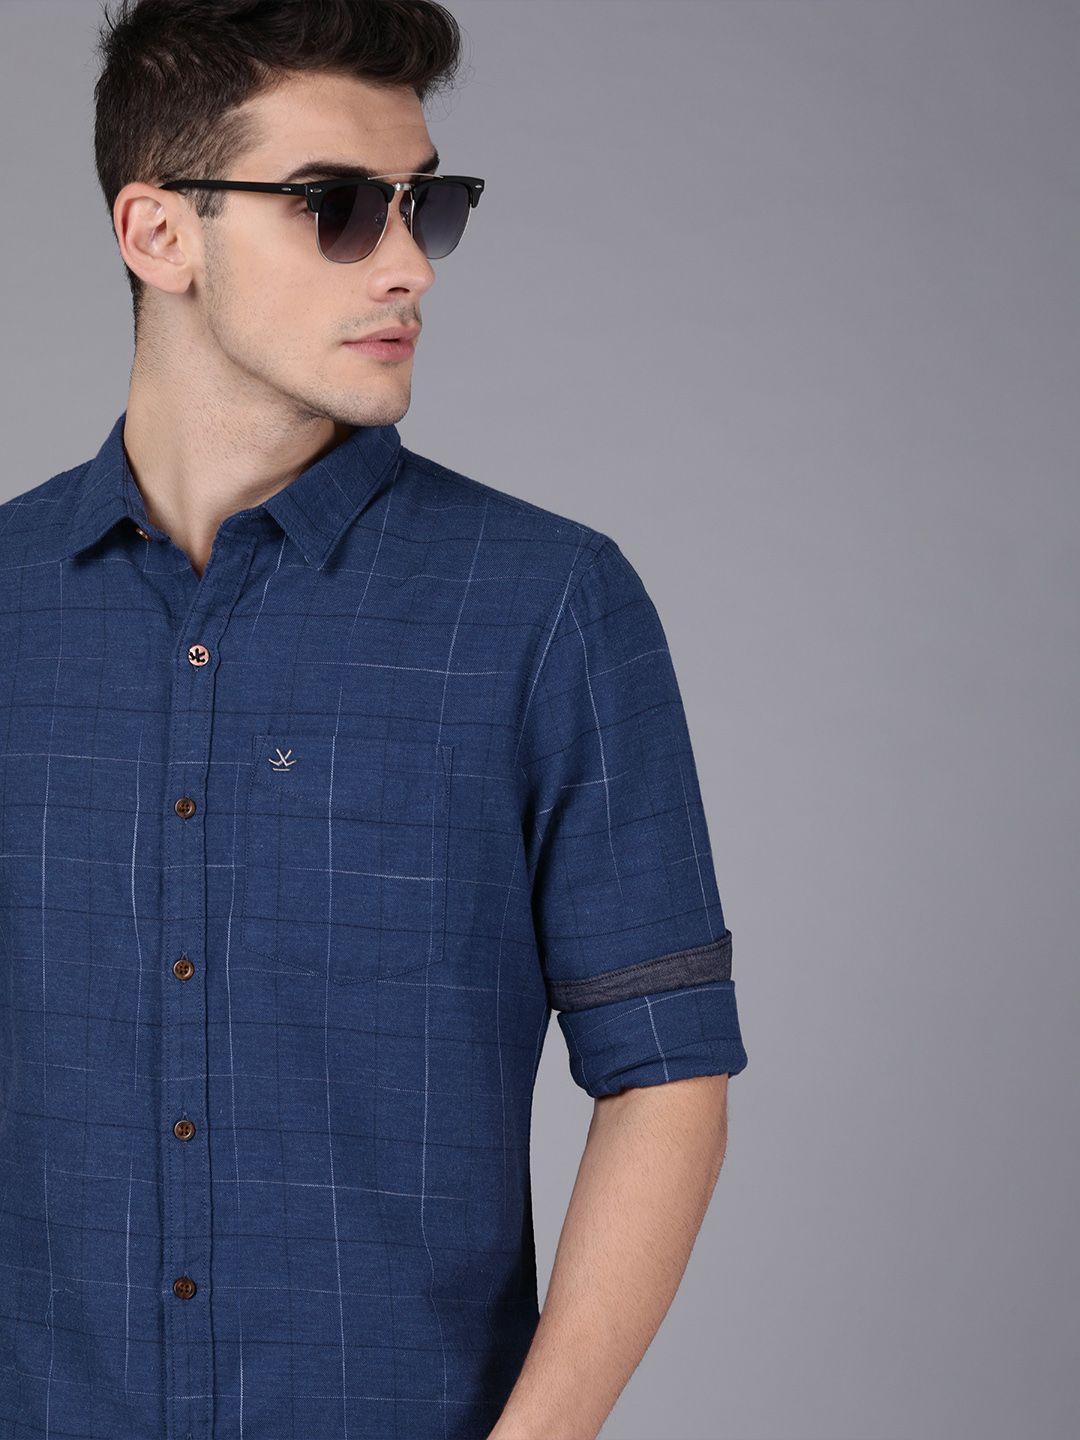 wrogn men navy blue & white slim fit checked casual shirt